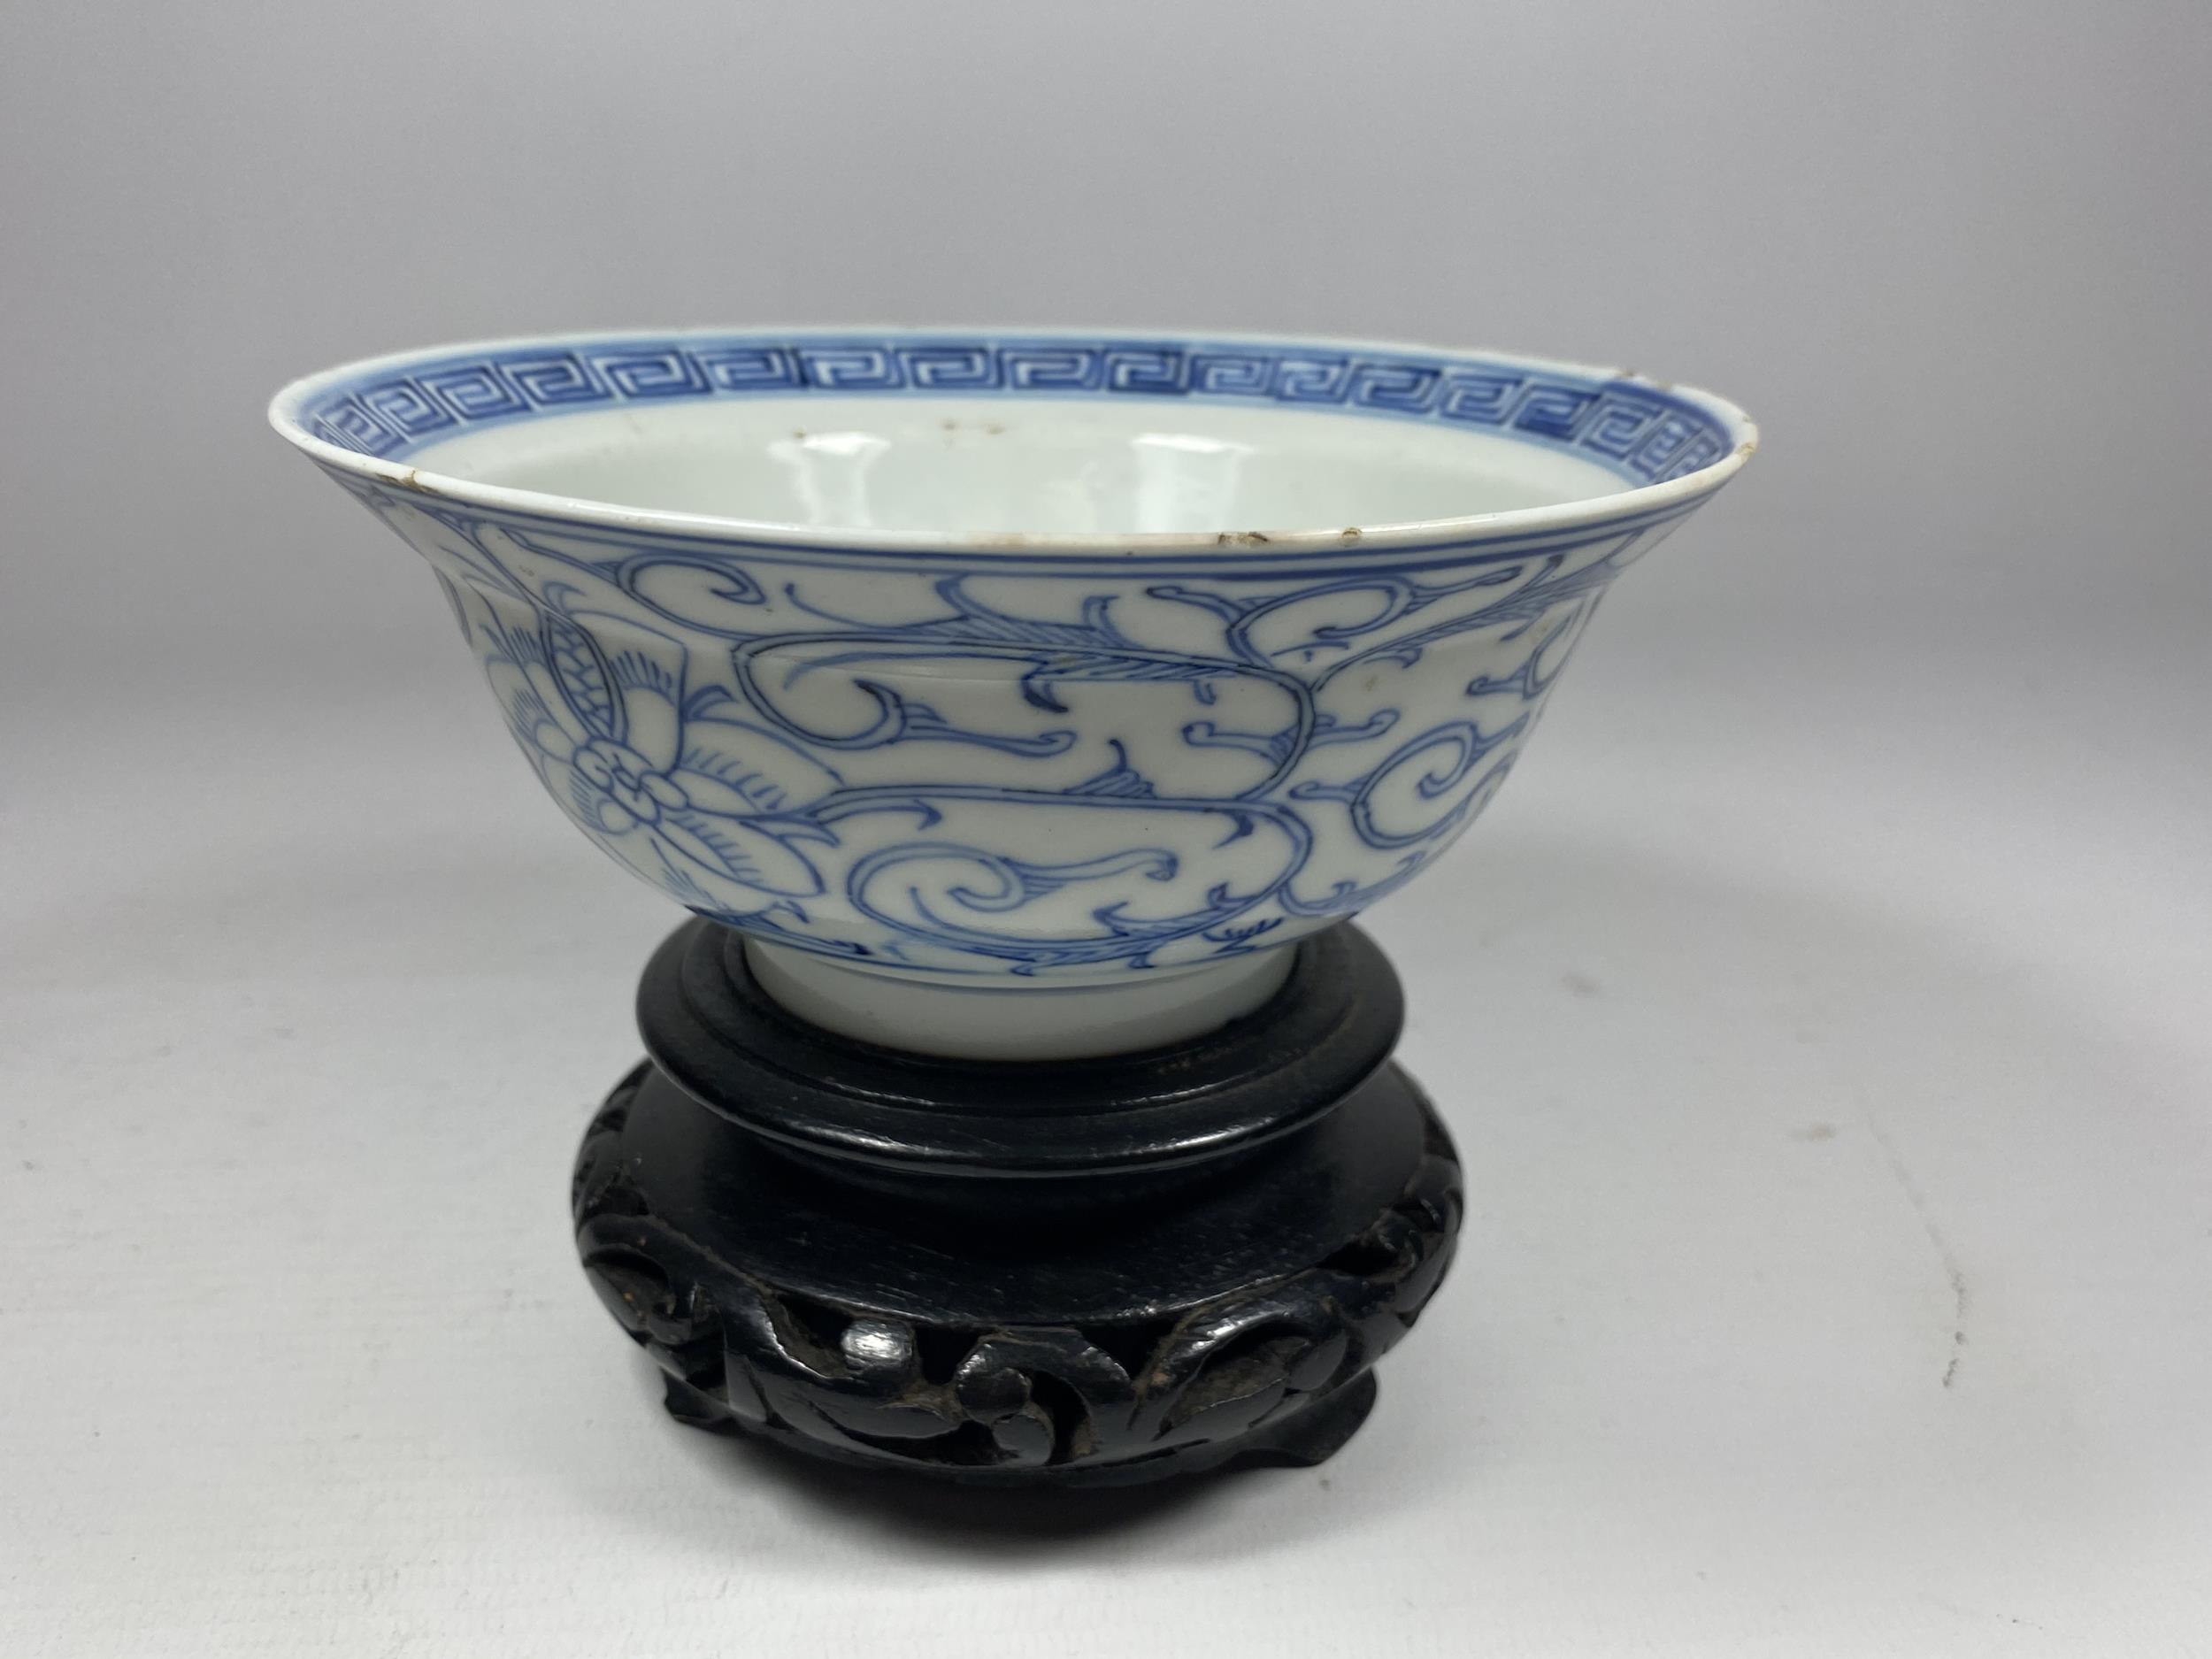 A MID-LATE 19TH CENTURY CHINESE QING TONGZHI PERIOD (1862-1874) BLUE & WHITE PORCELAIN BOWL ON